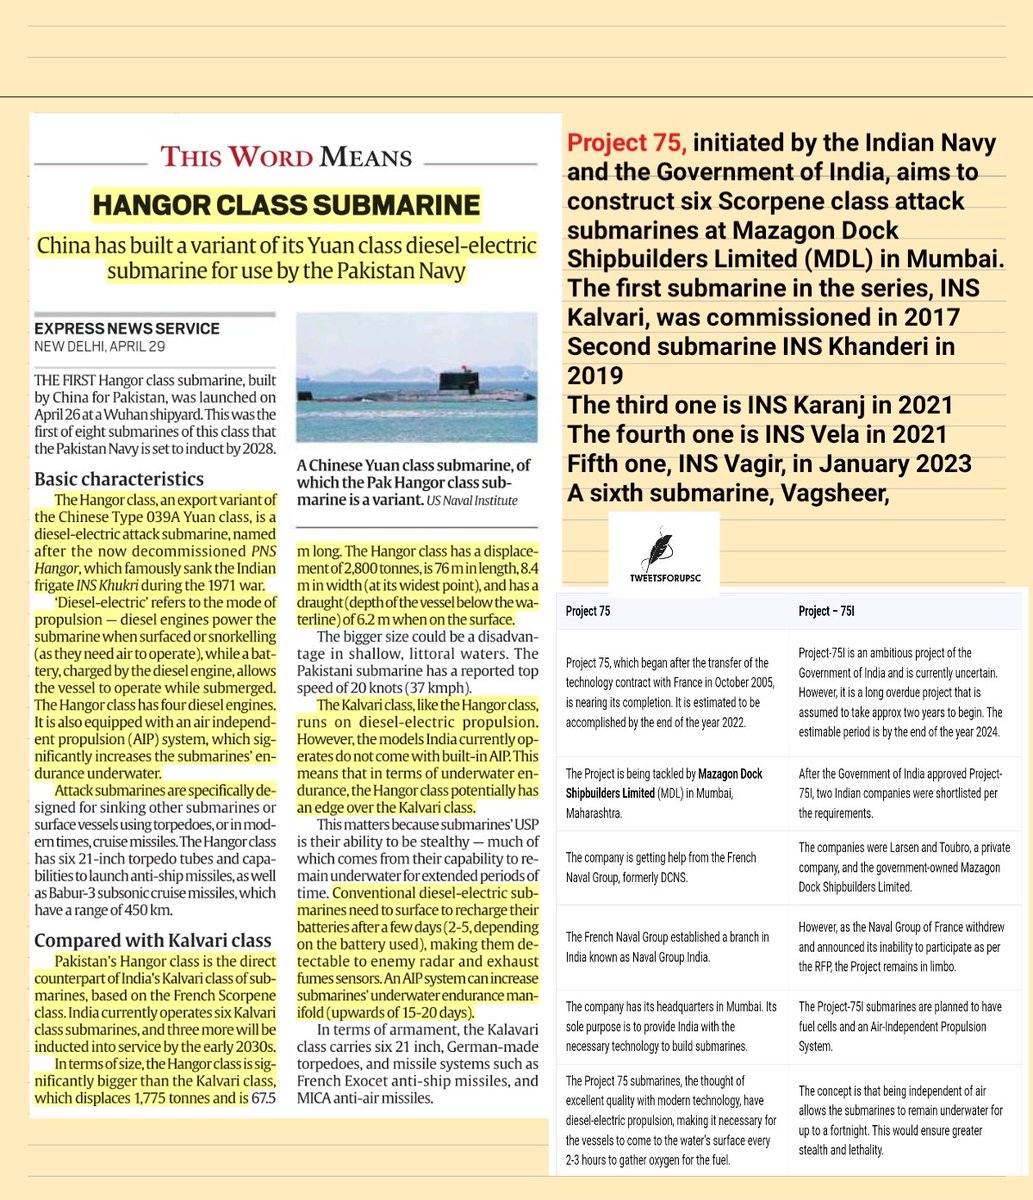 Important Submarines 
Source Indian Express